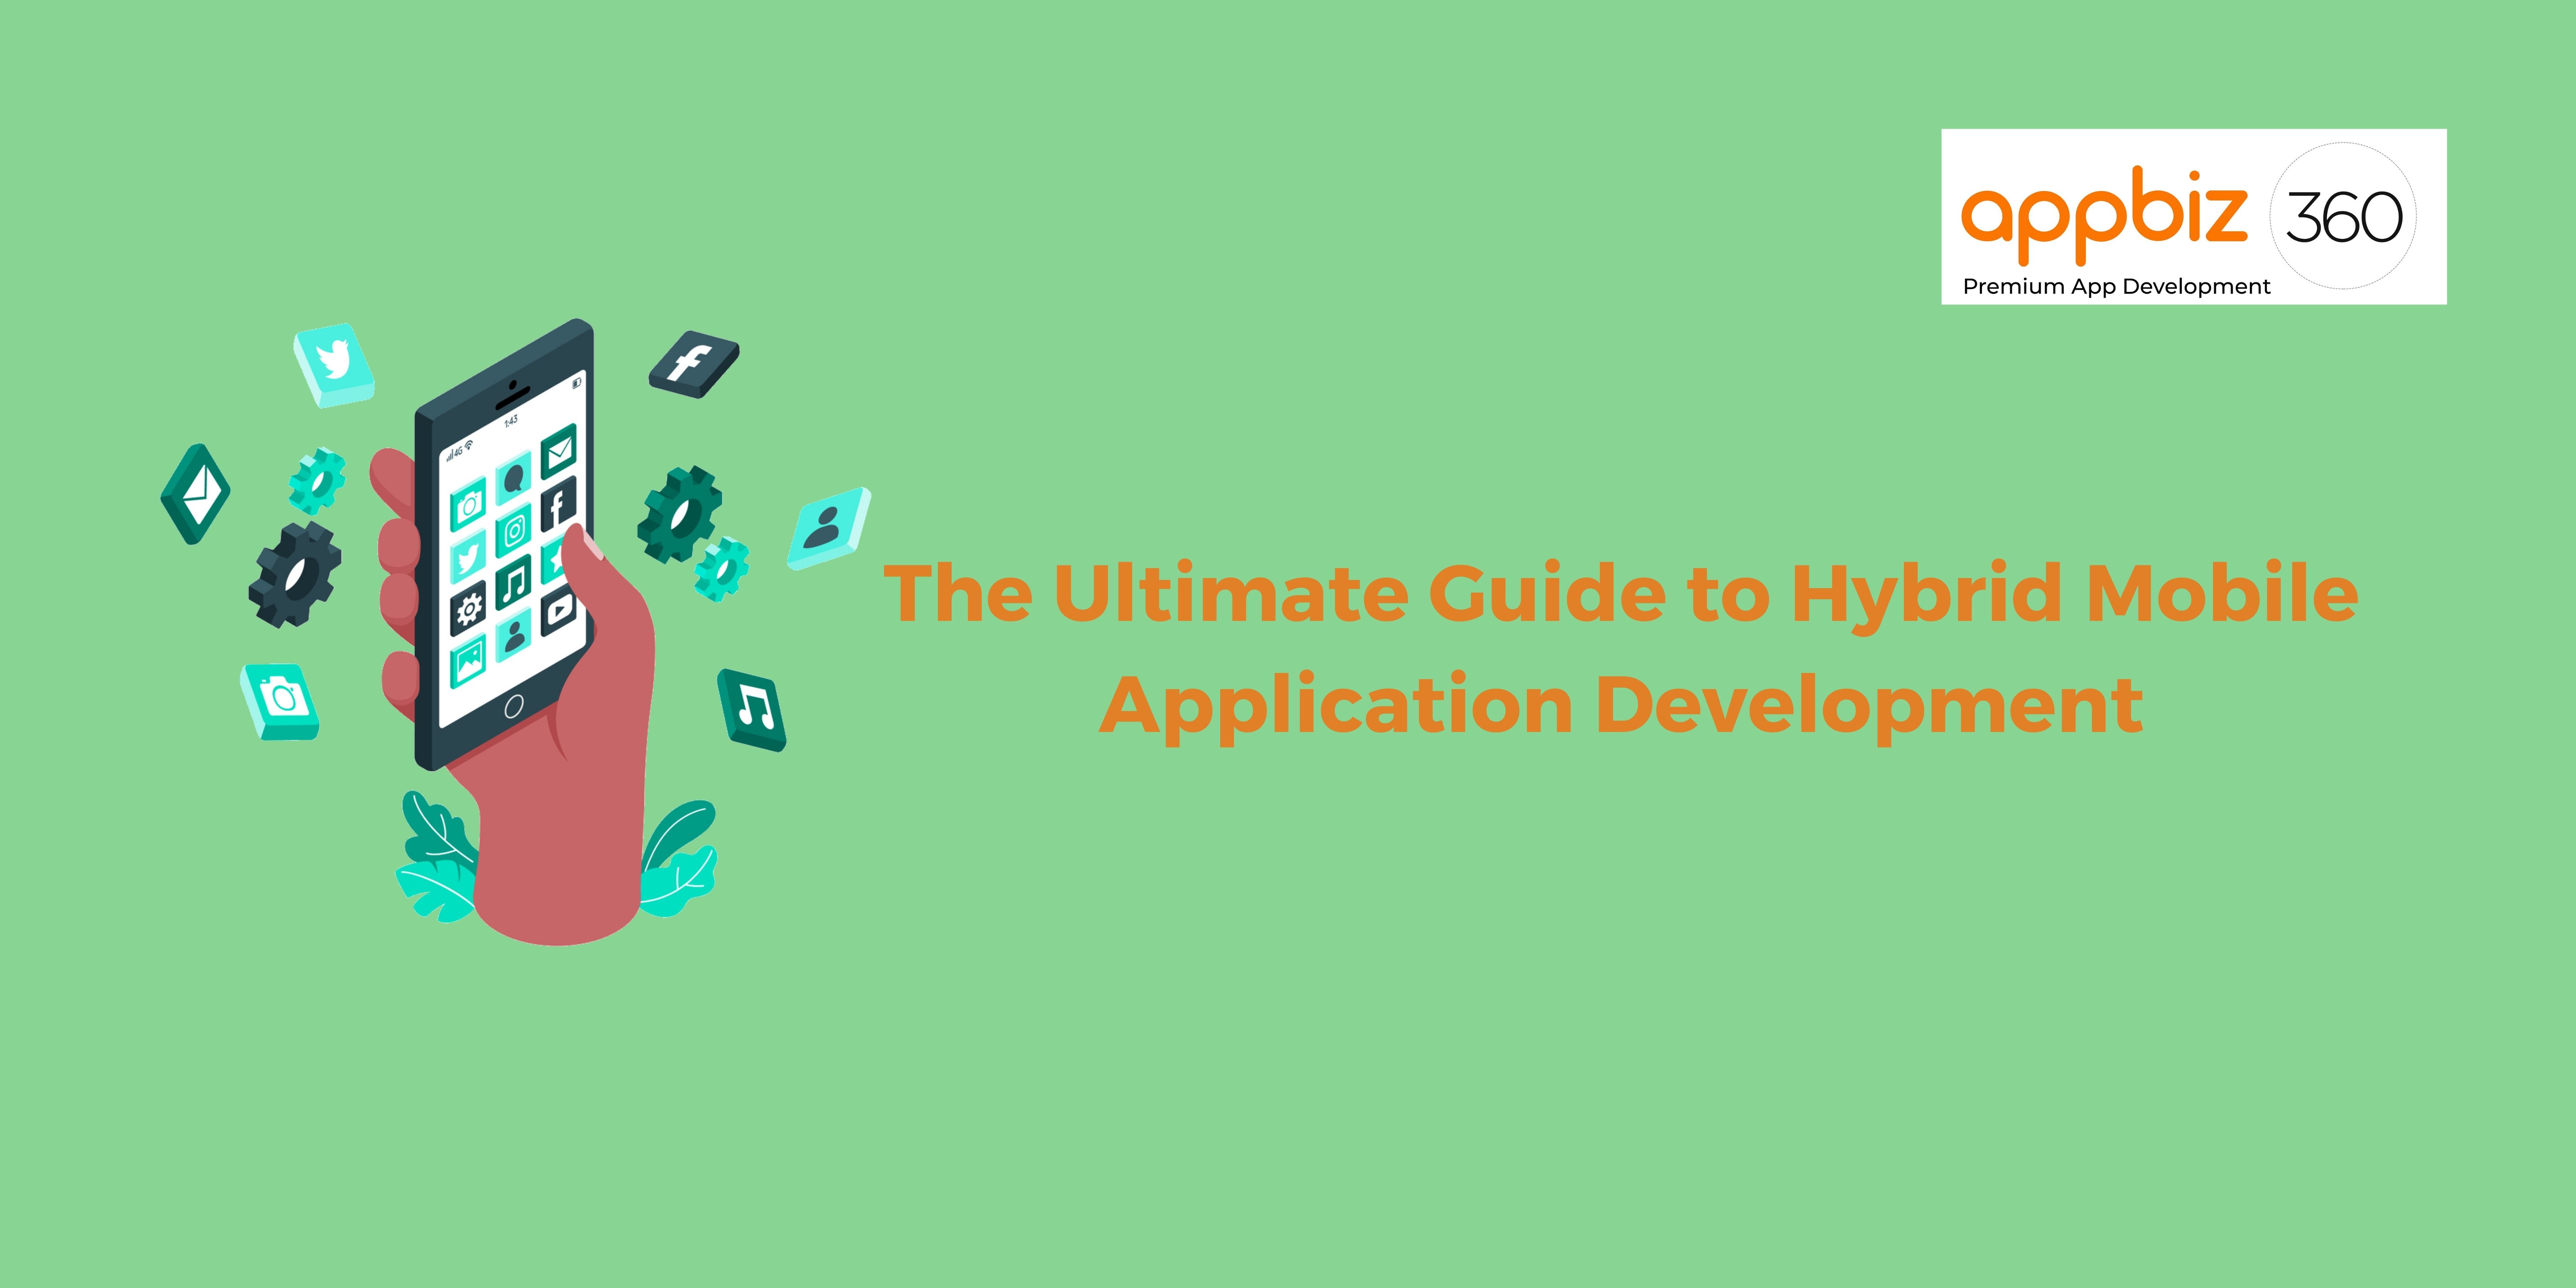 The Ultimate Guide to Hybrid Mobile Application Development